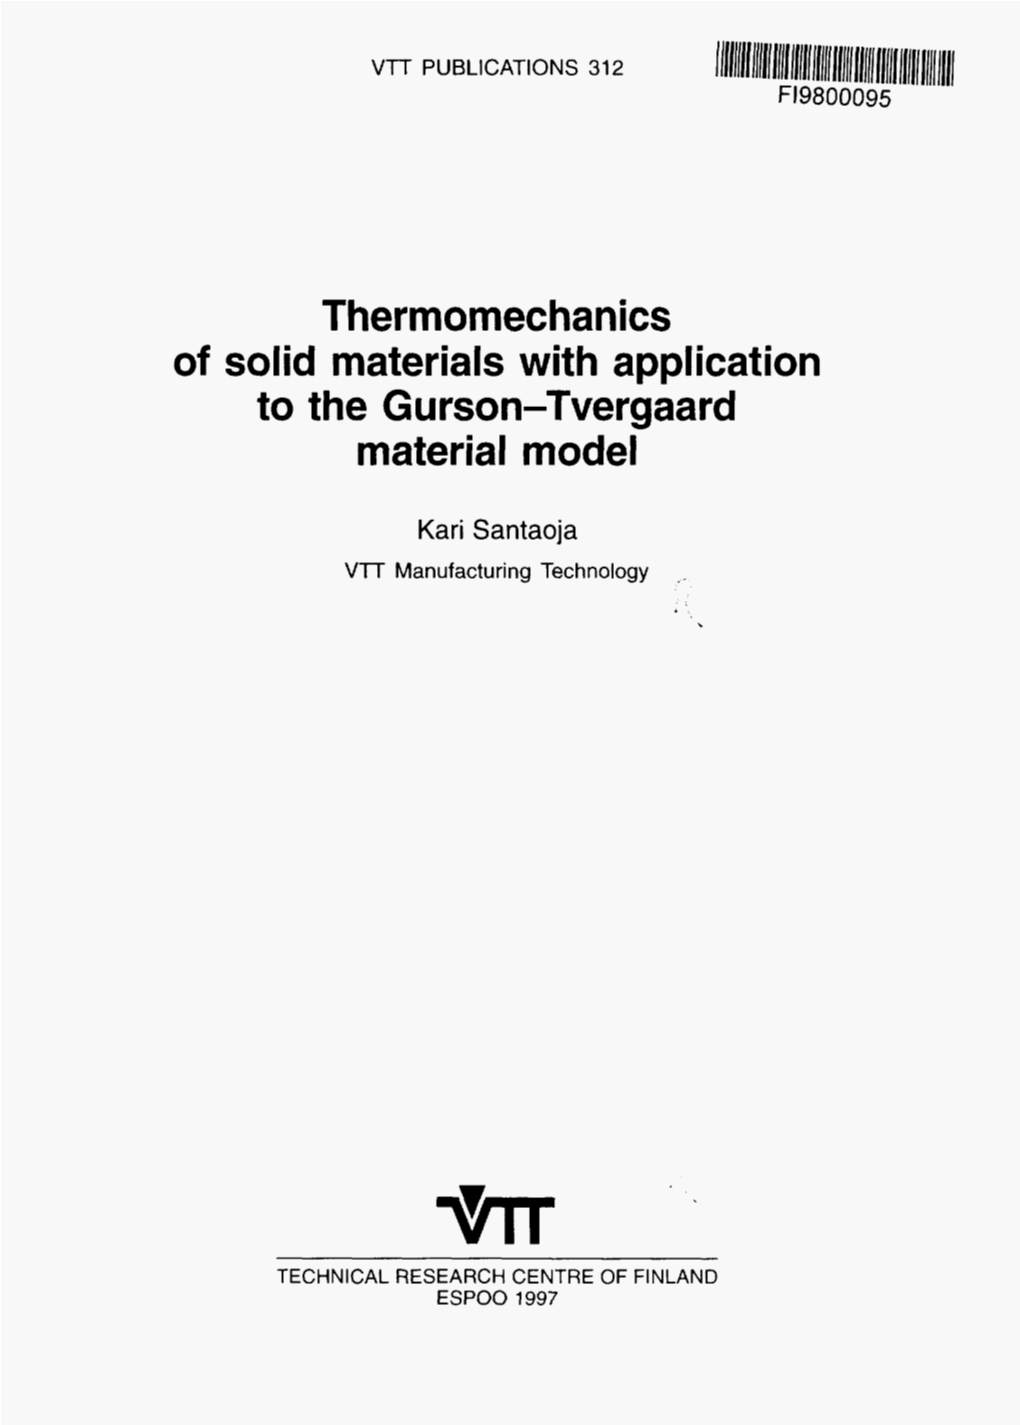 Thermomechanics of Solid Materials with Application to the Gurson-Tvergaard Material Model